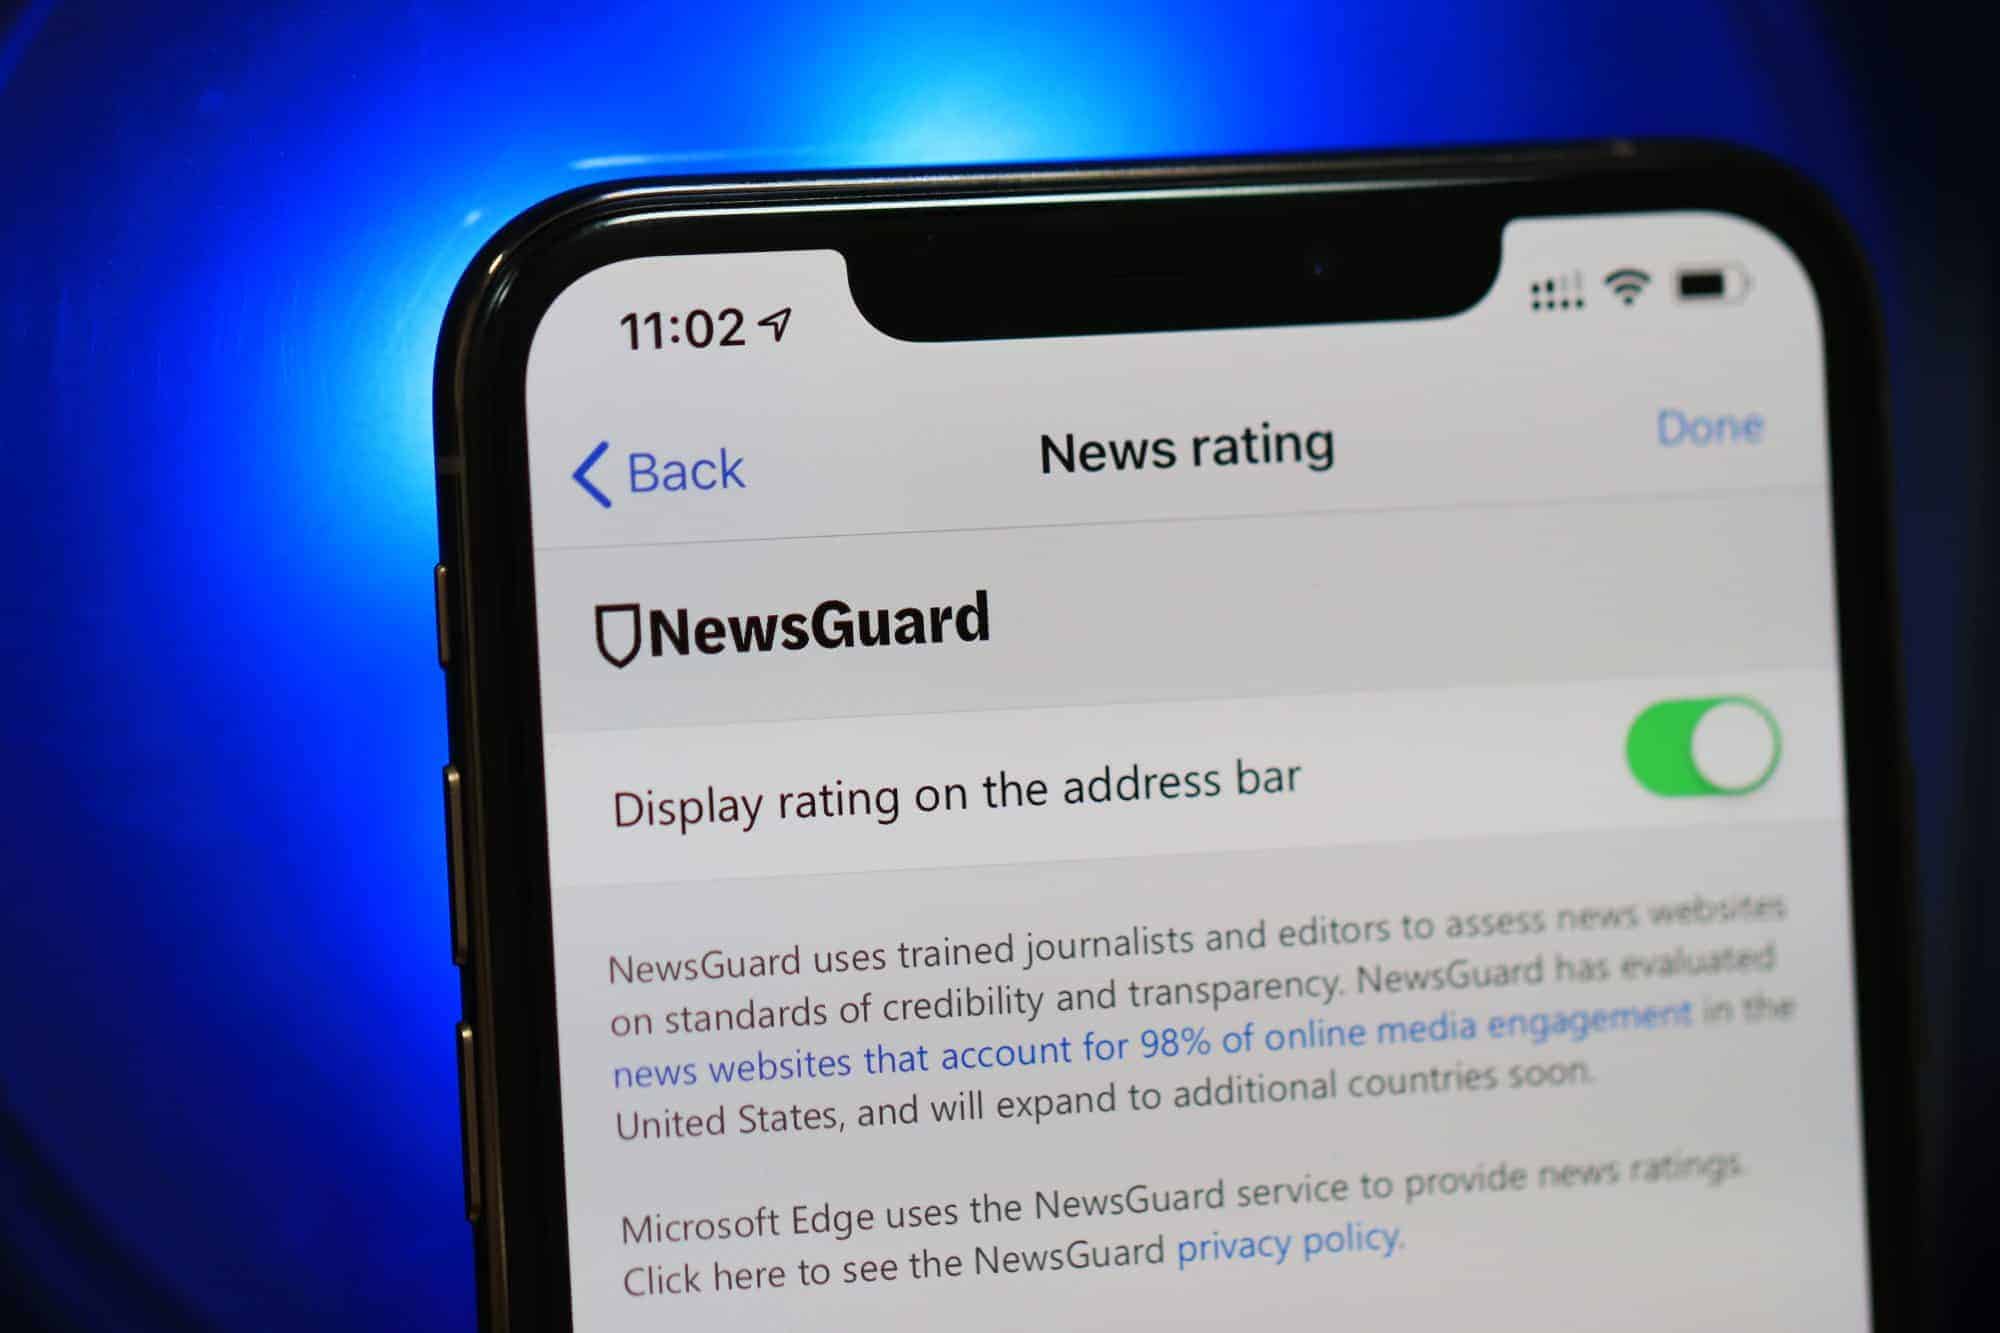 Microsoft Edge for iOS gets picture-in-picture mode, NewsGuard and more with version 42.9.3 update